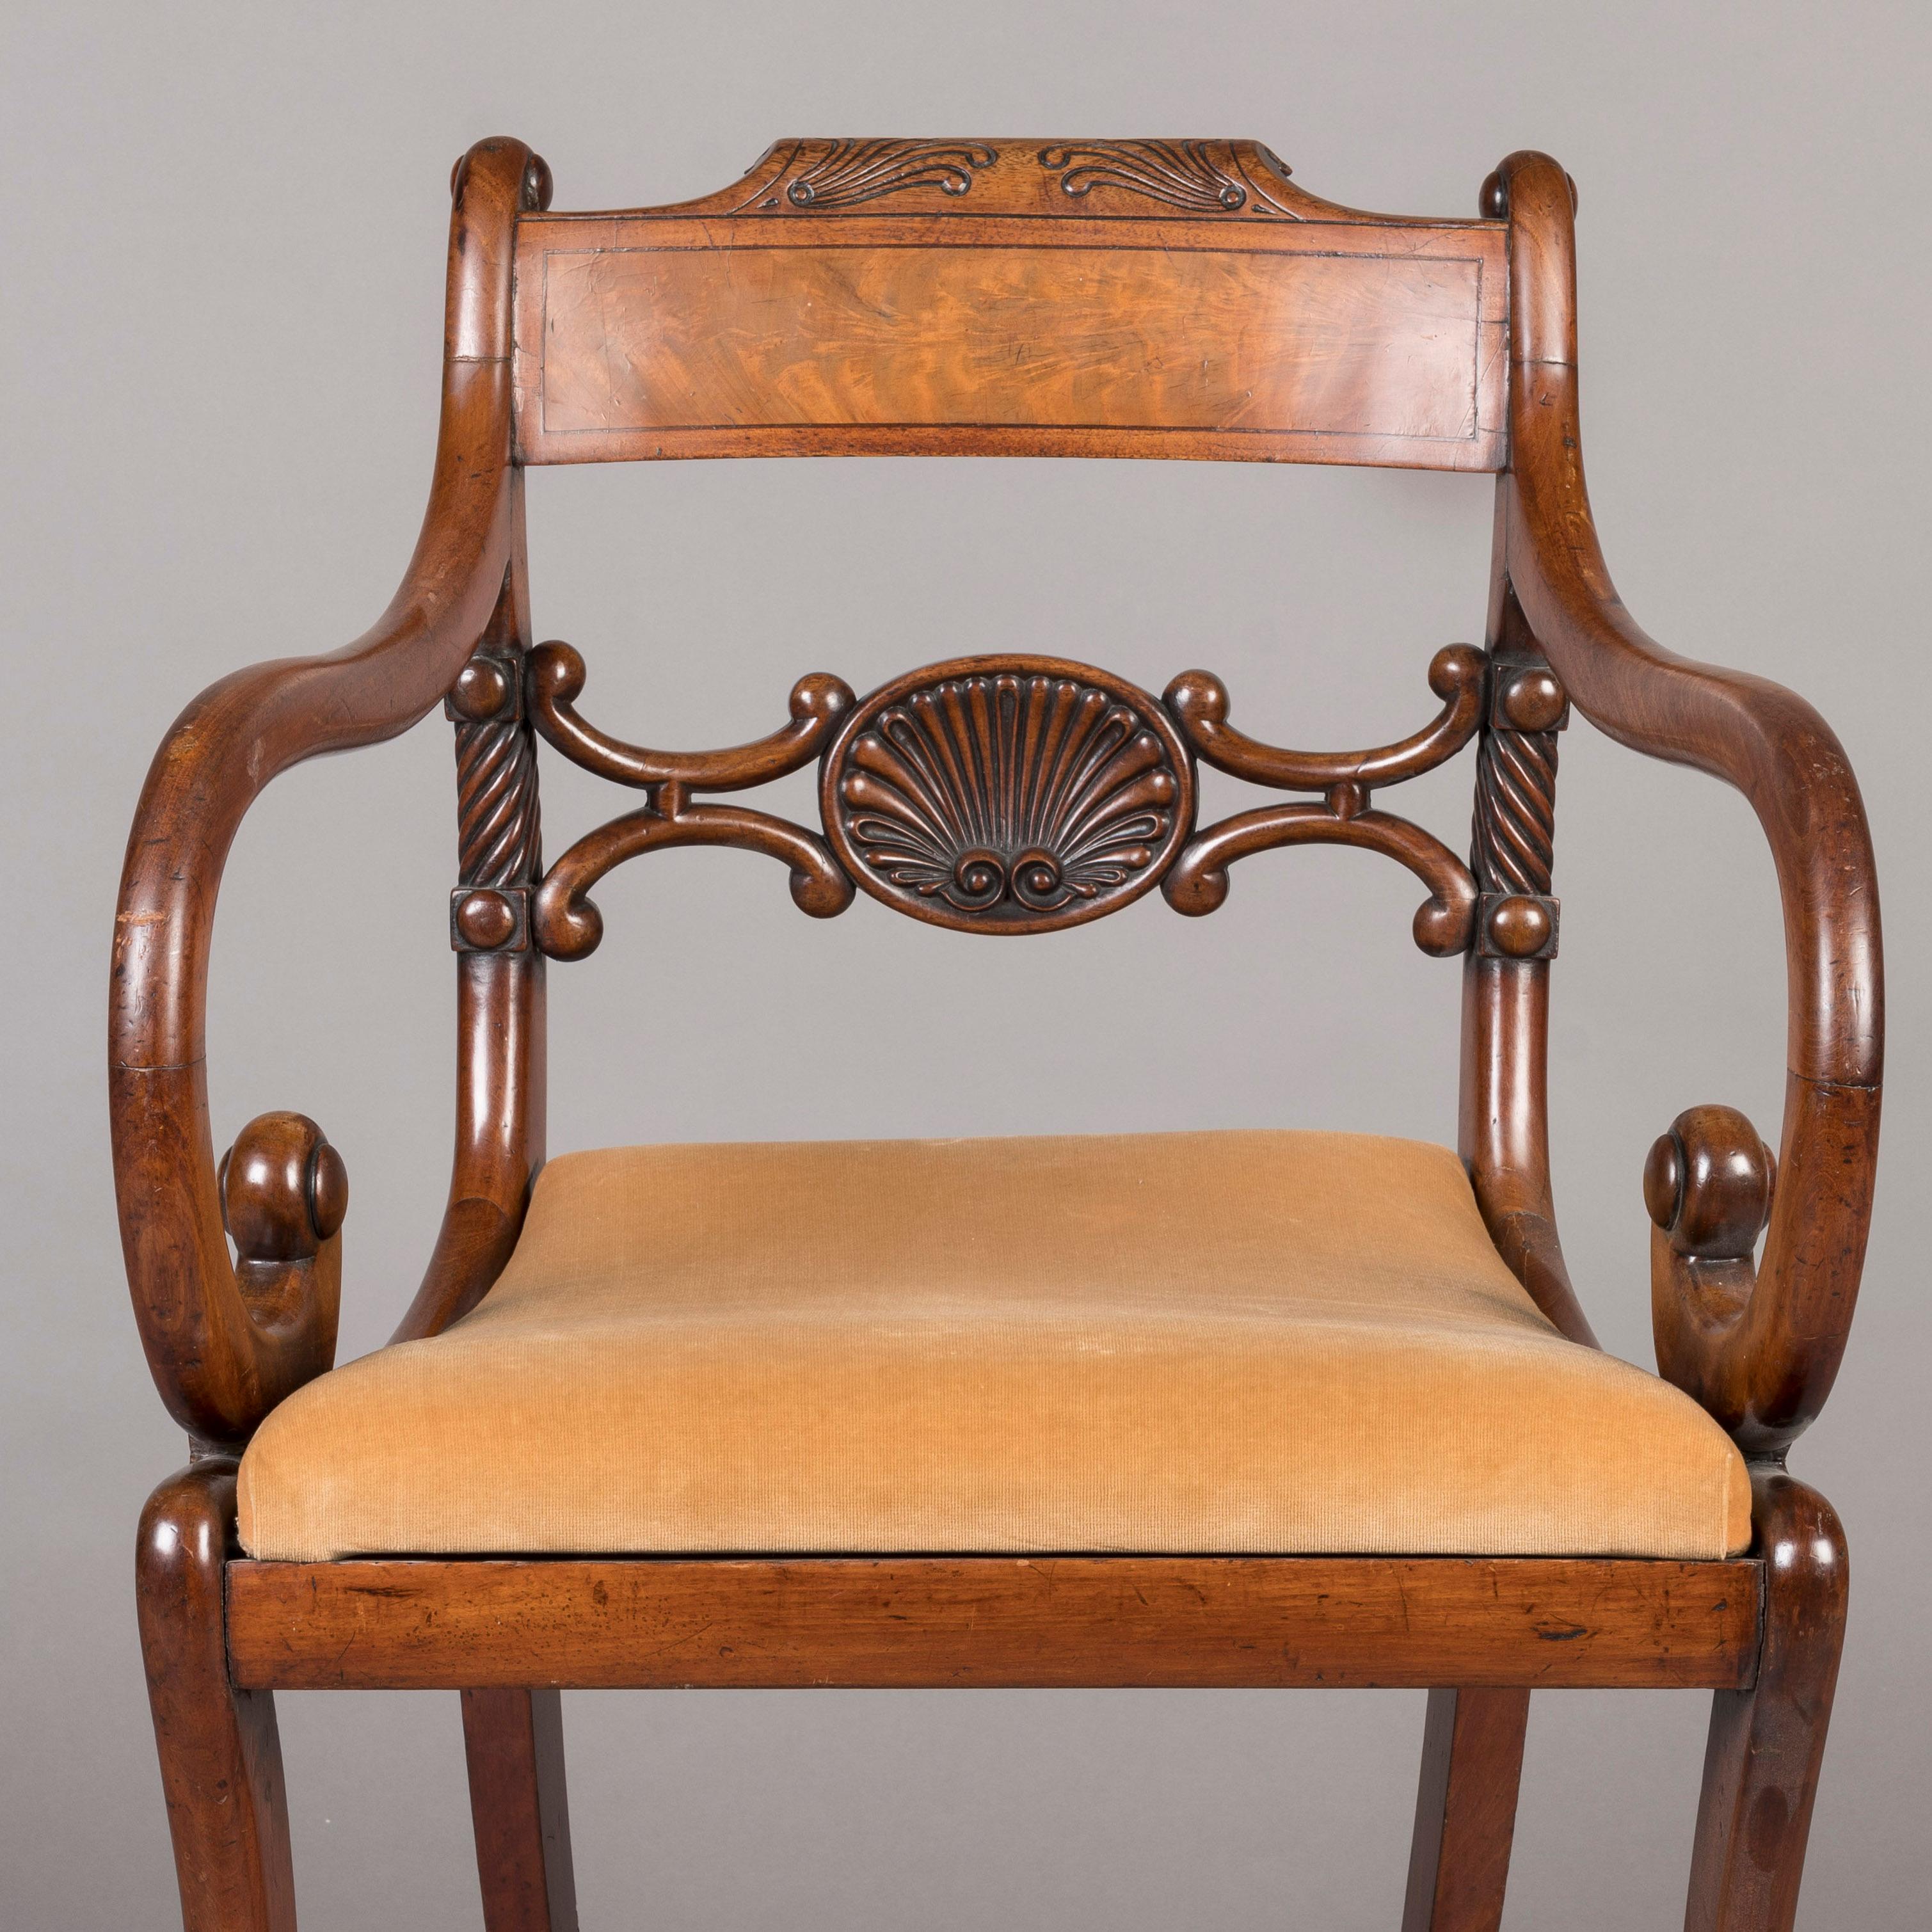 Early 19th Century English Regency Period Carved Mahogany Armchairs  For Sale 2